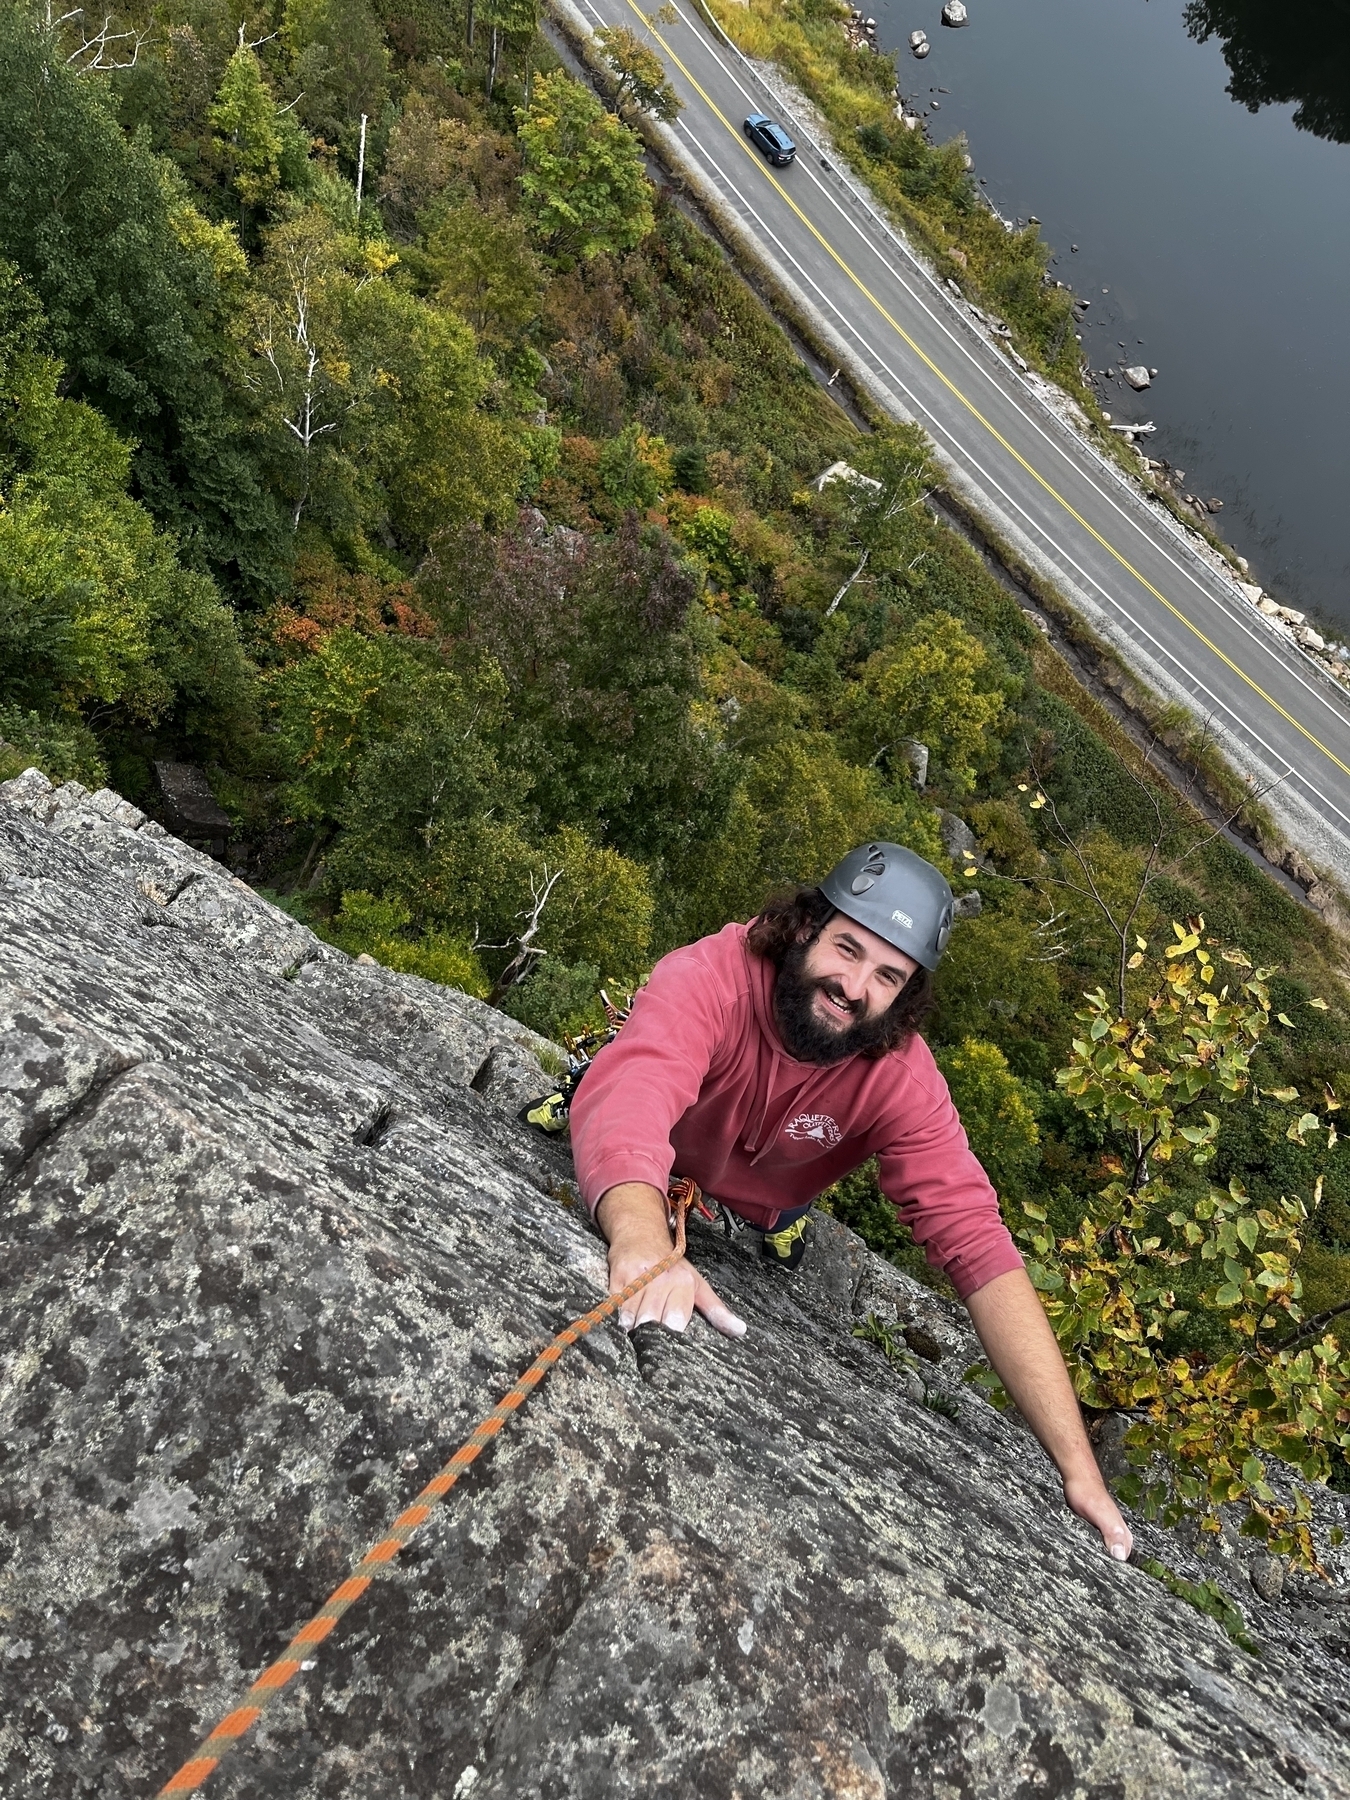 Looking down a steep mountain cliff with a bearded man climbing up it looking at the camera.